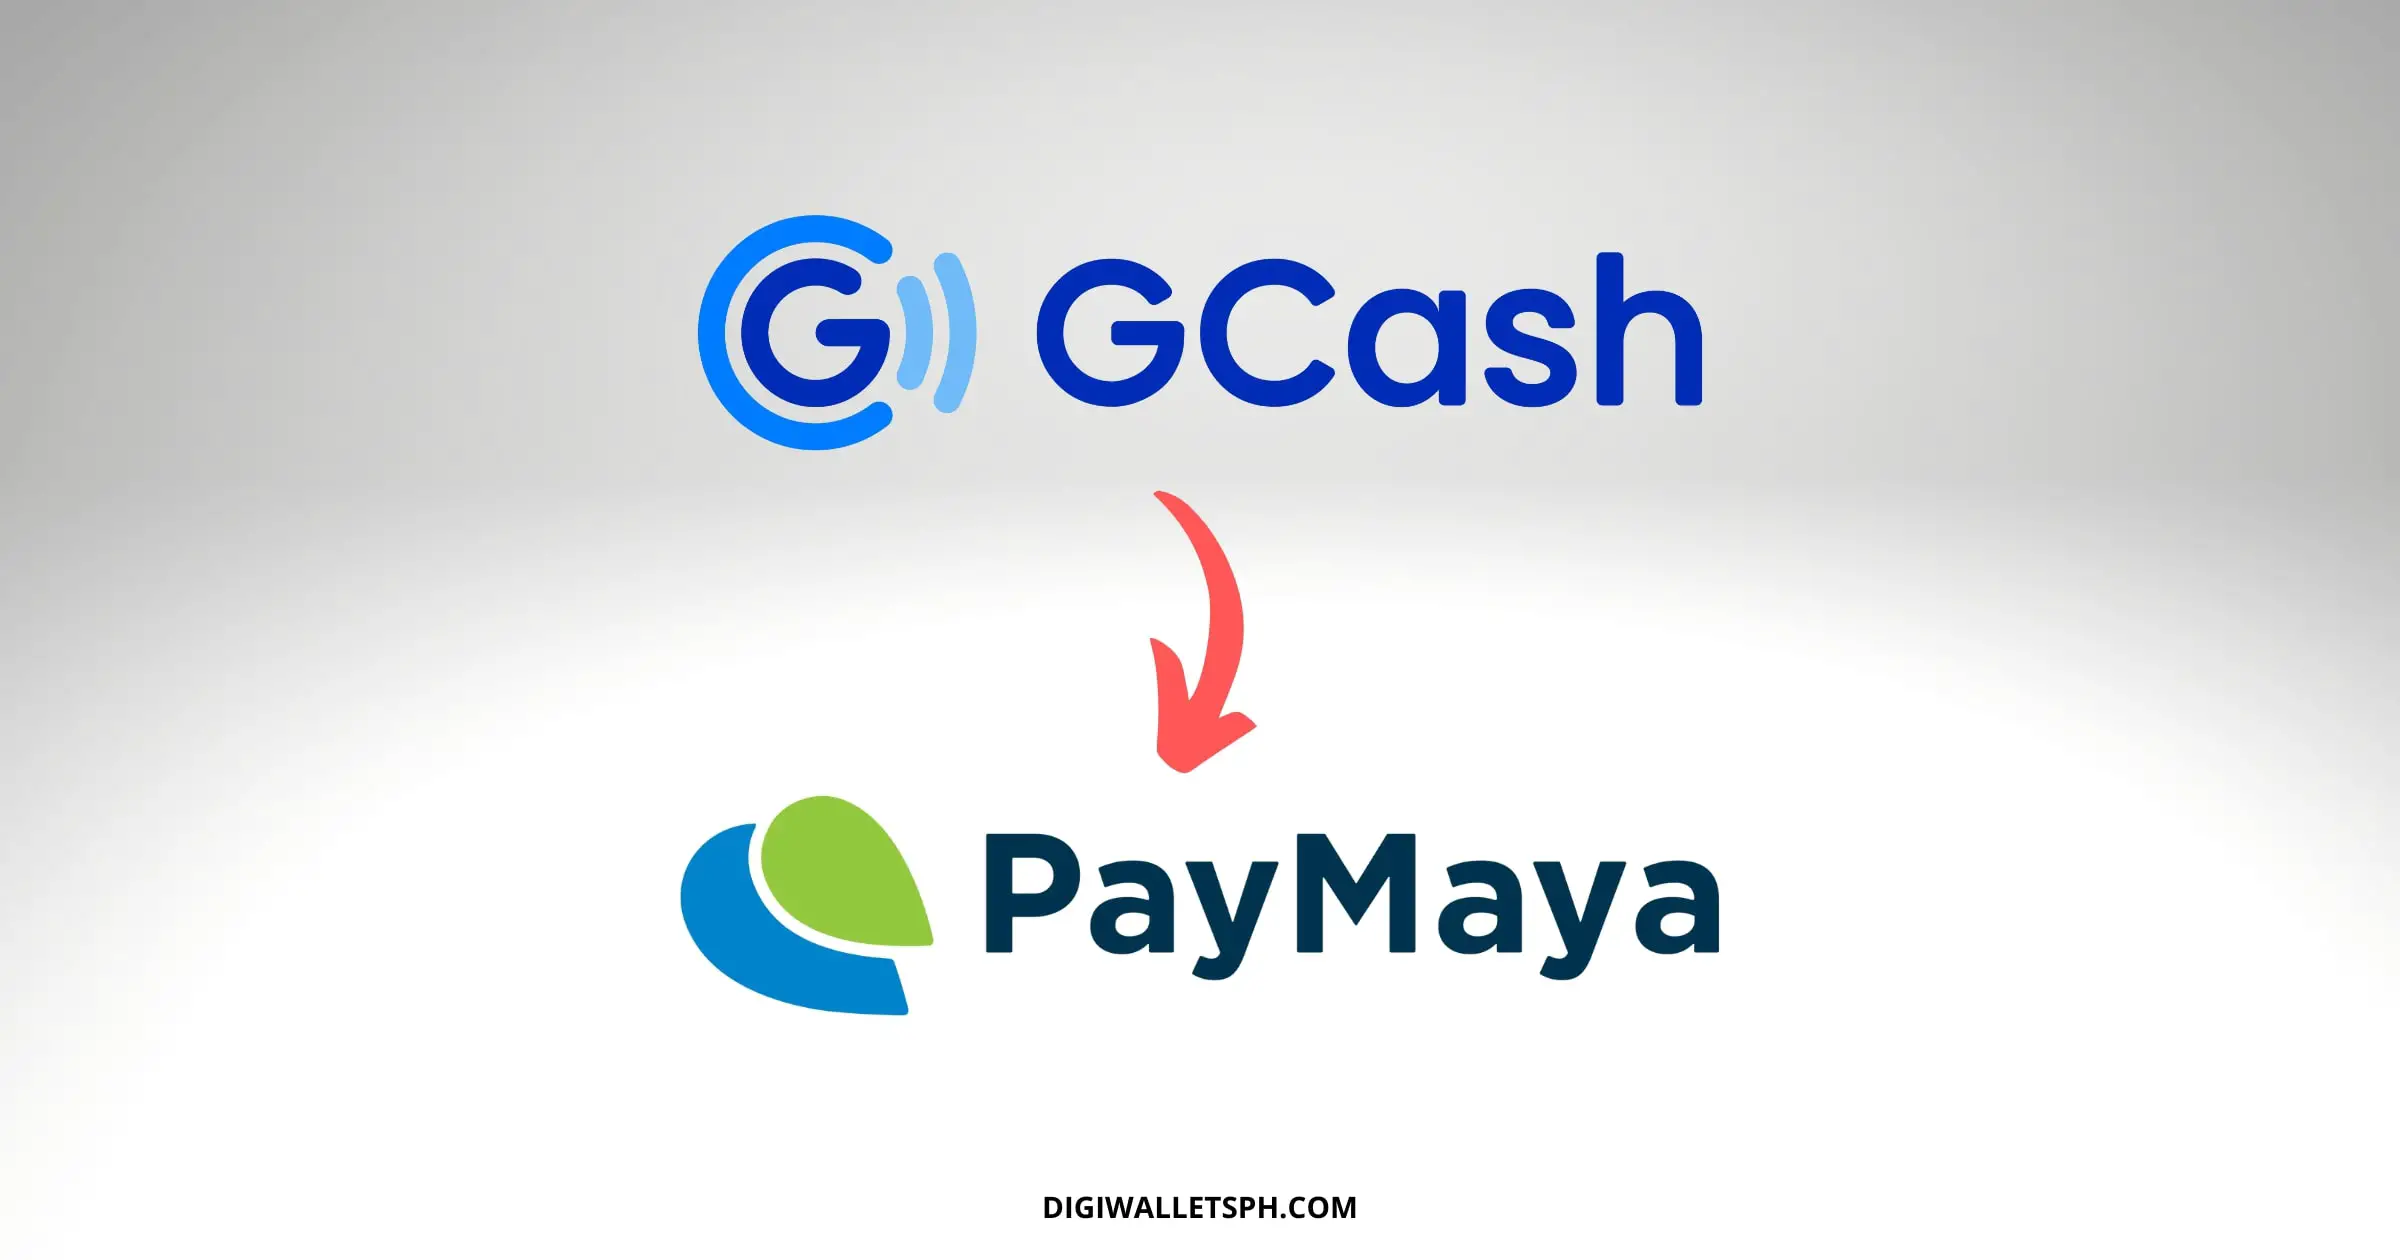 How to send money from GCash to Paymaya